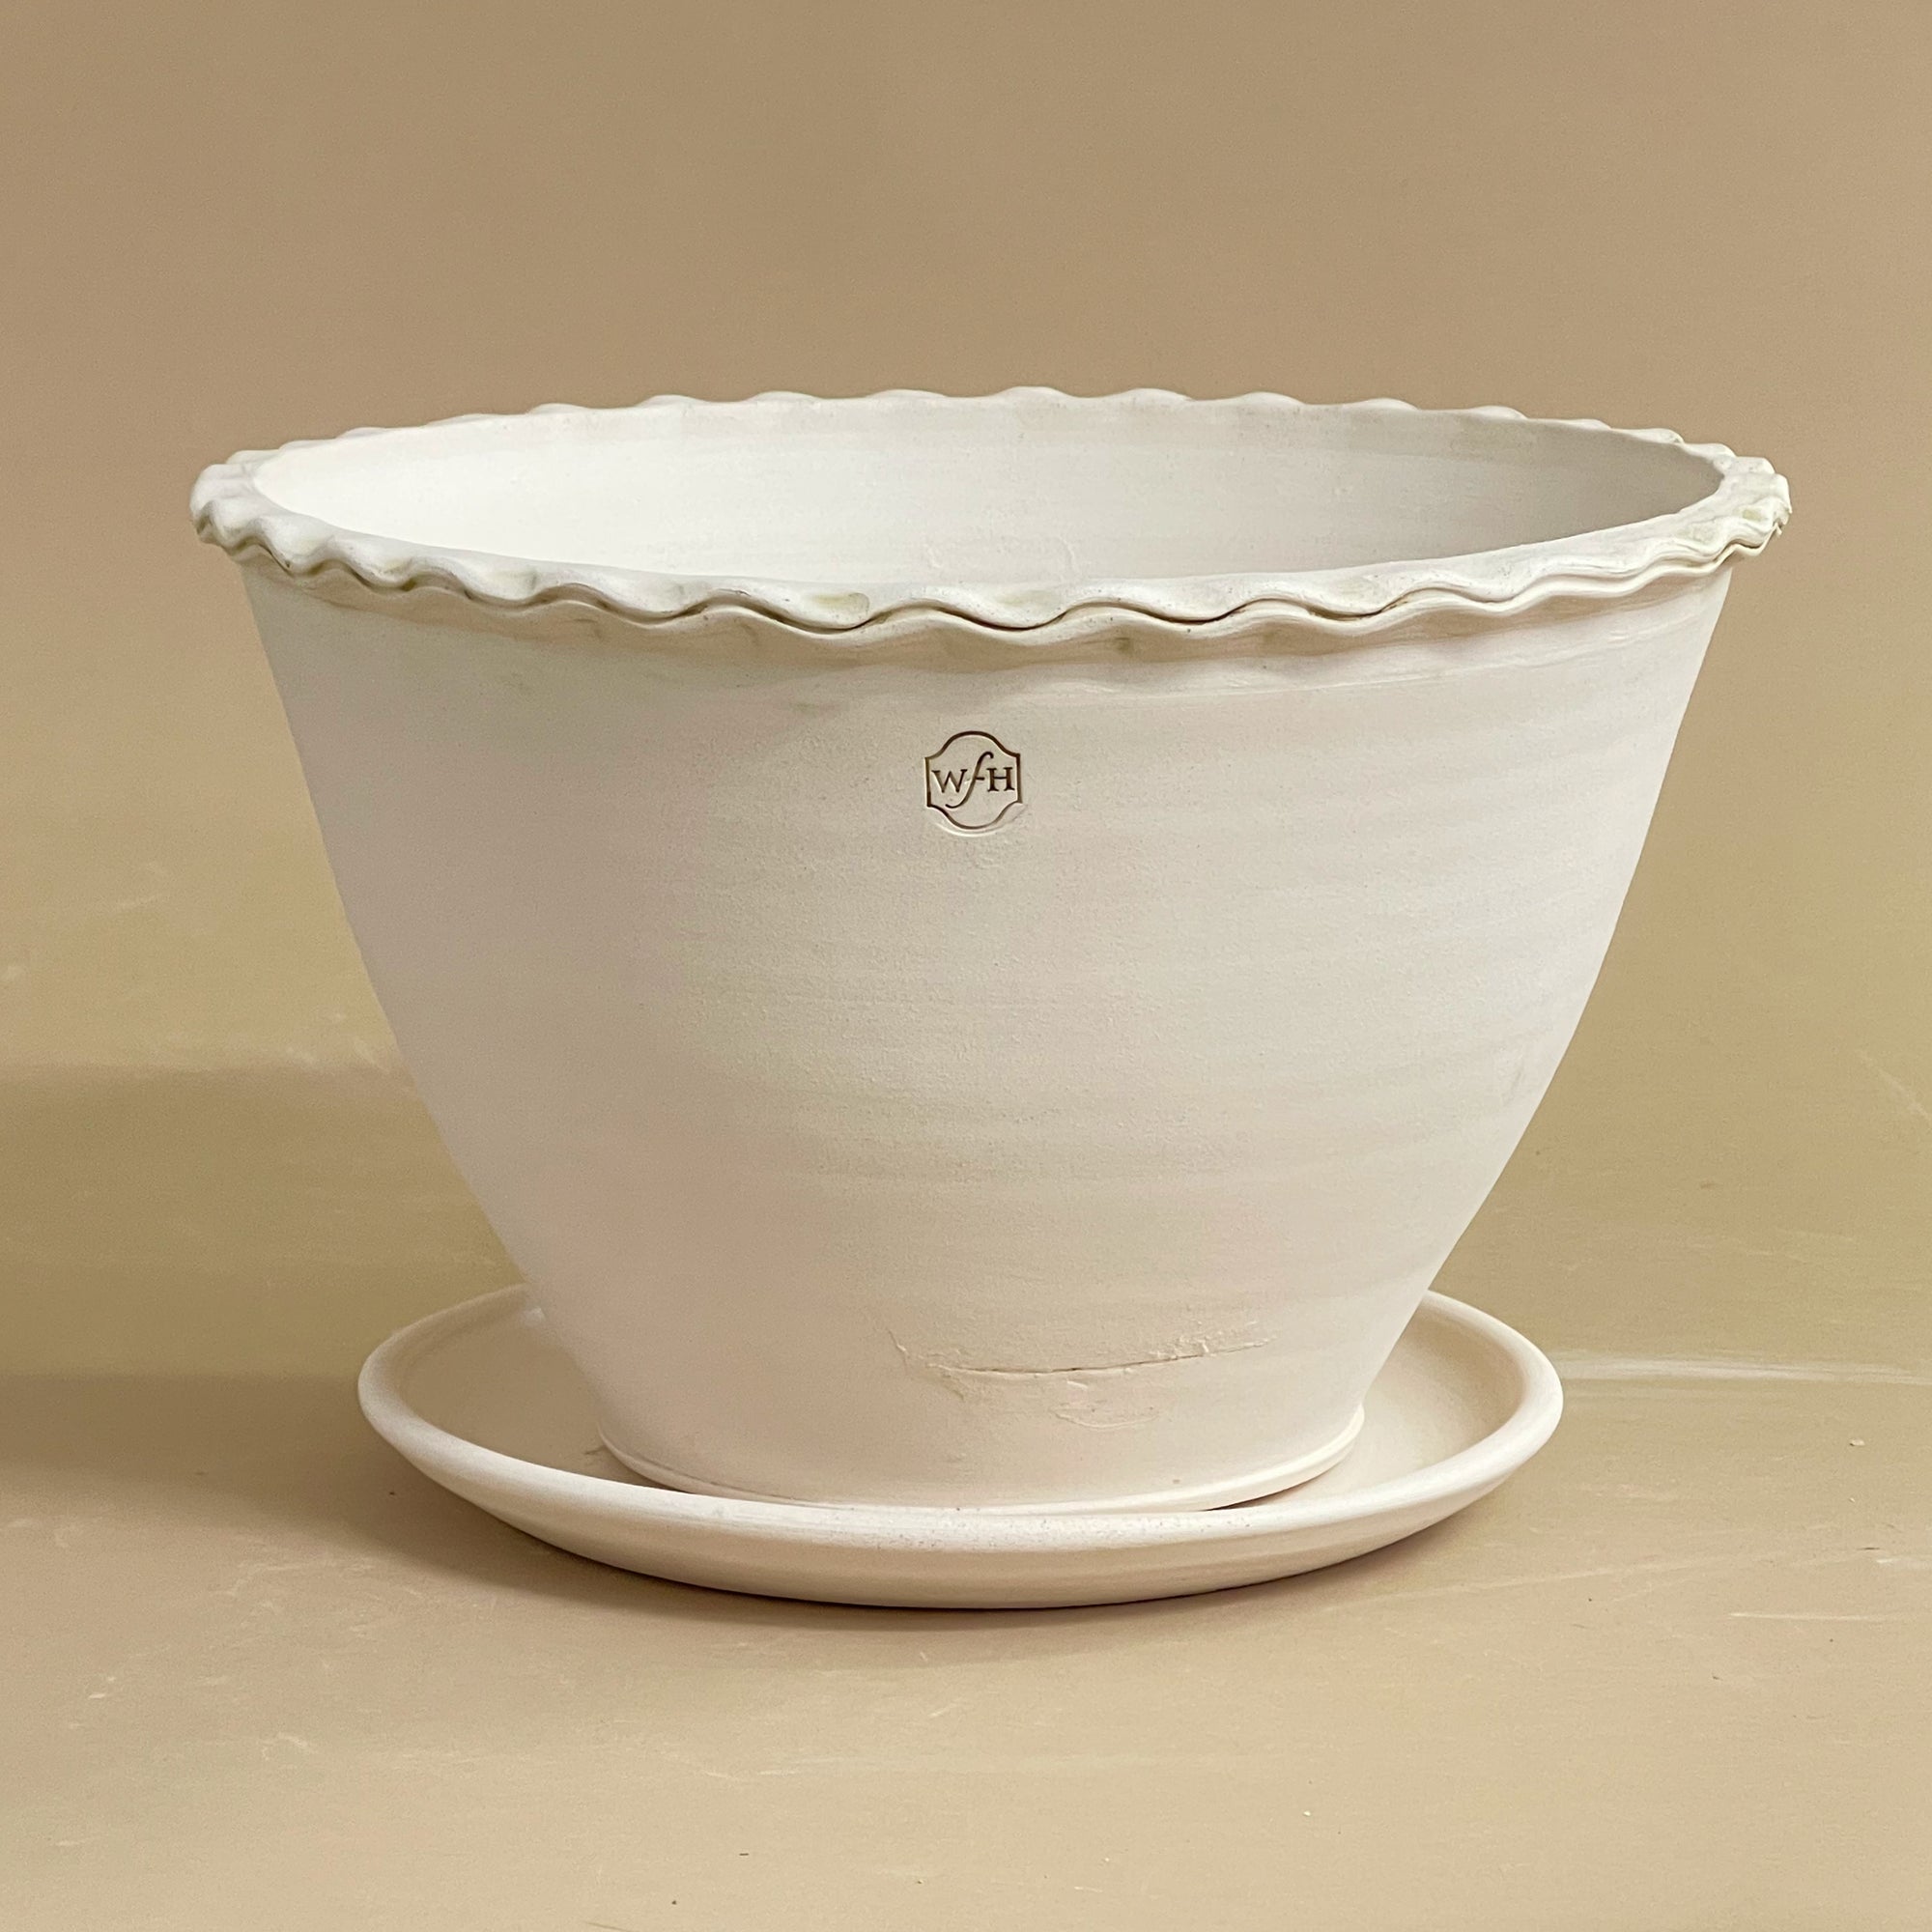 Pastry Rim Bowl with Saucer